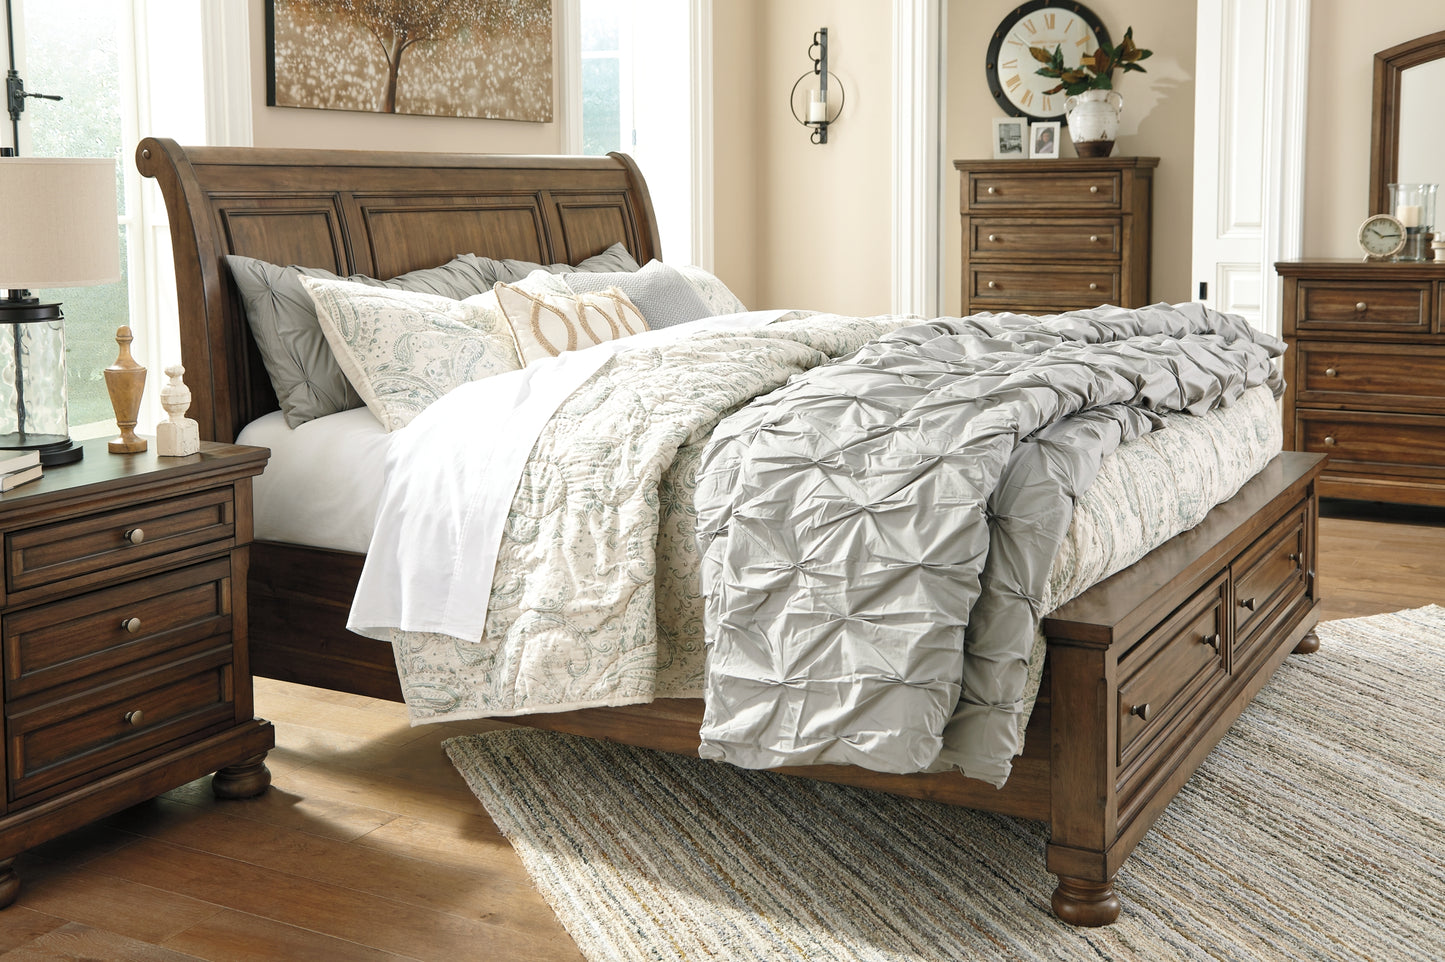 Ashley Express - Flynnter Queen Sleigh Bed with 2 Storage Drawers